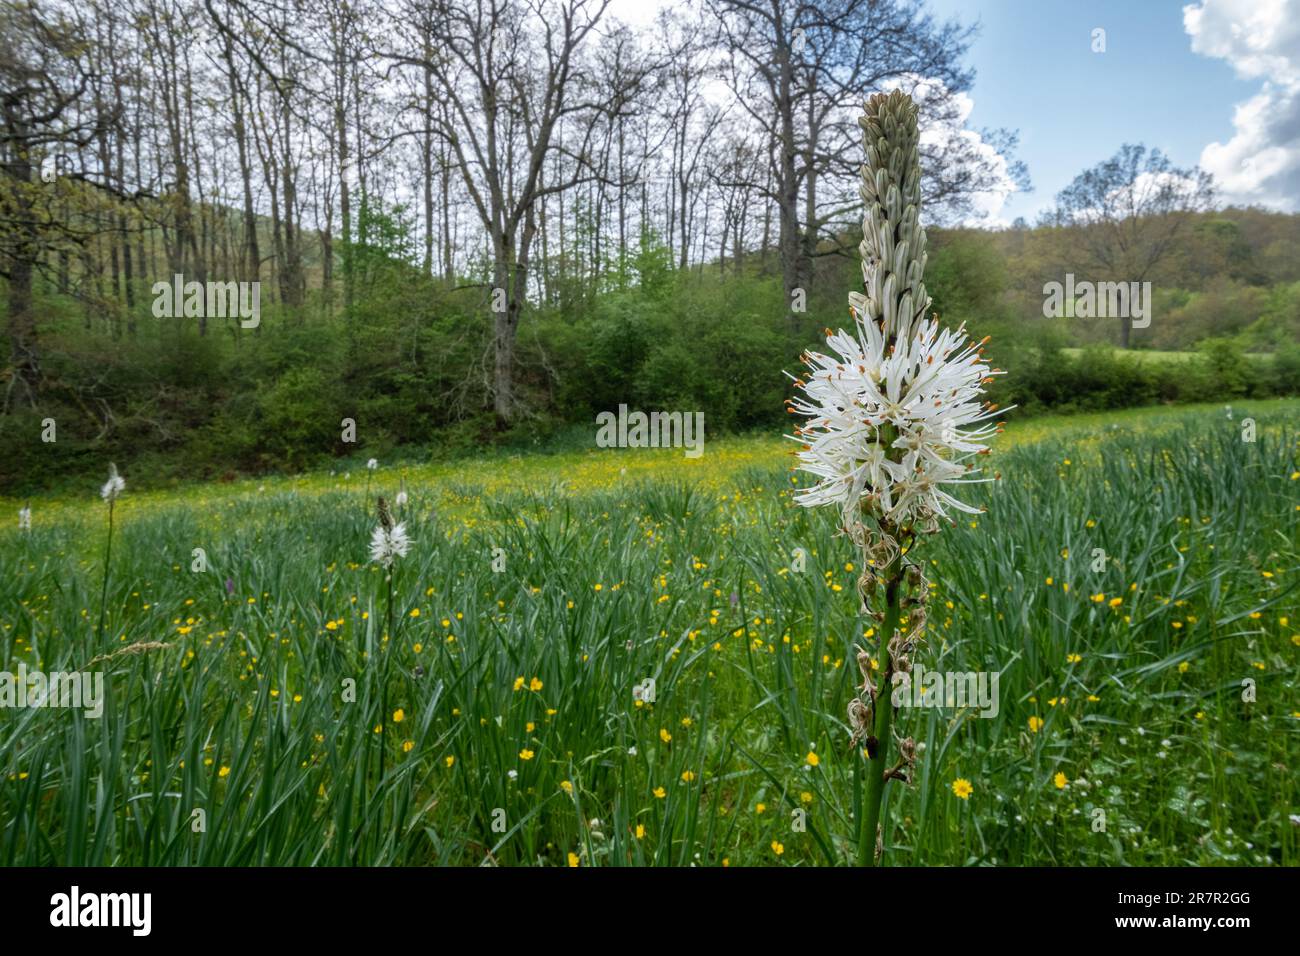 Asphodelus albus, common name white asphodel, flowering in a wildflower meadow in Laghetto di Gavelli nature reserve, Umbria, Italy, Europe Stock Photo